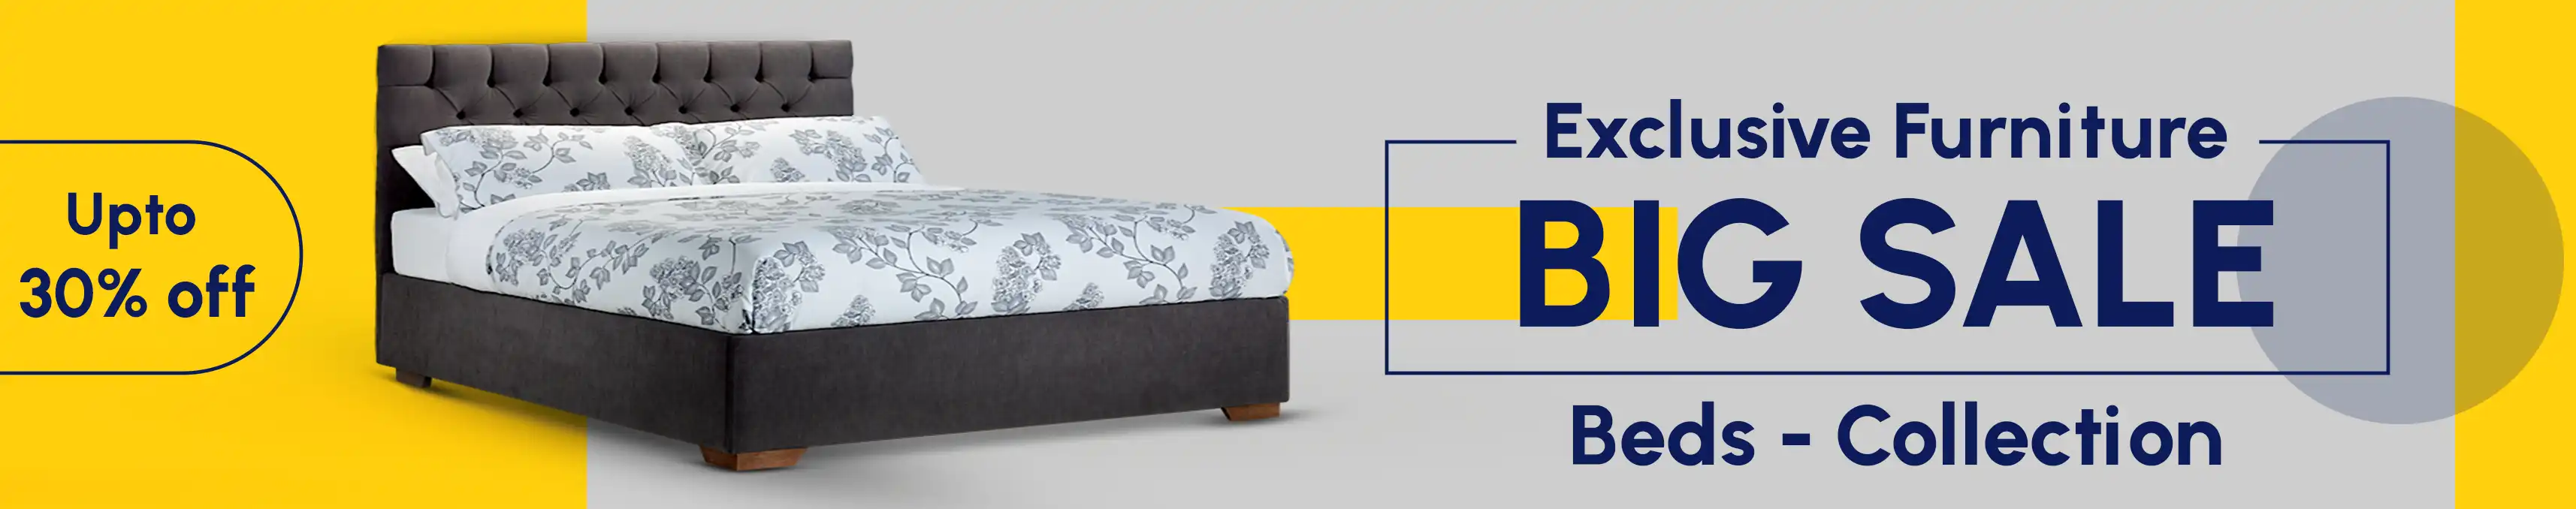 Beds Collection Banner - Woods Royal